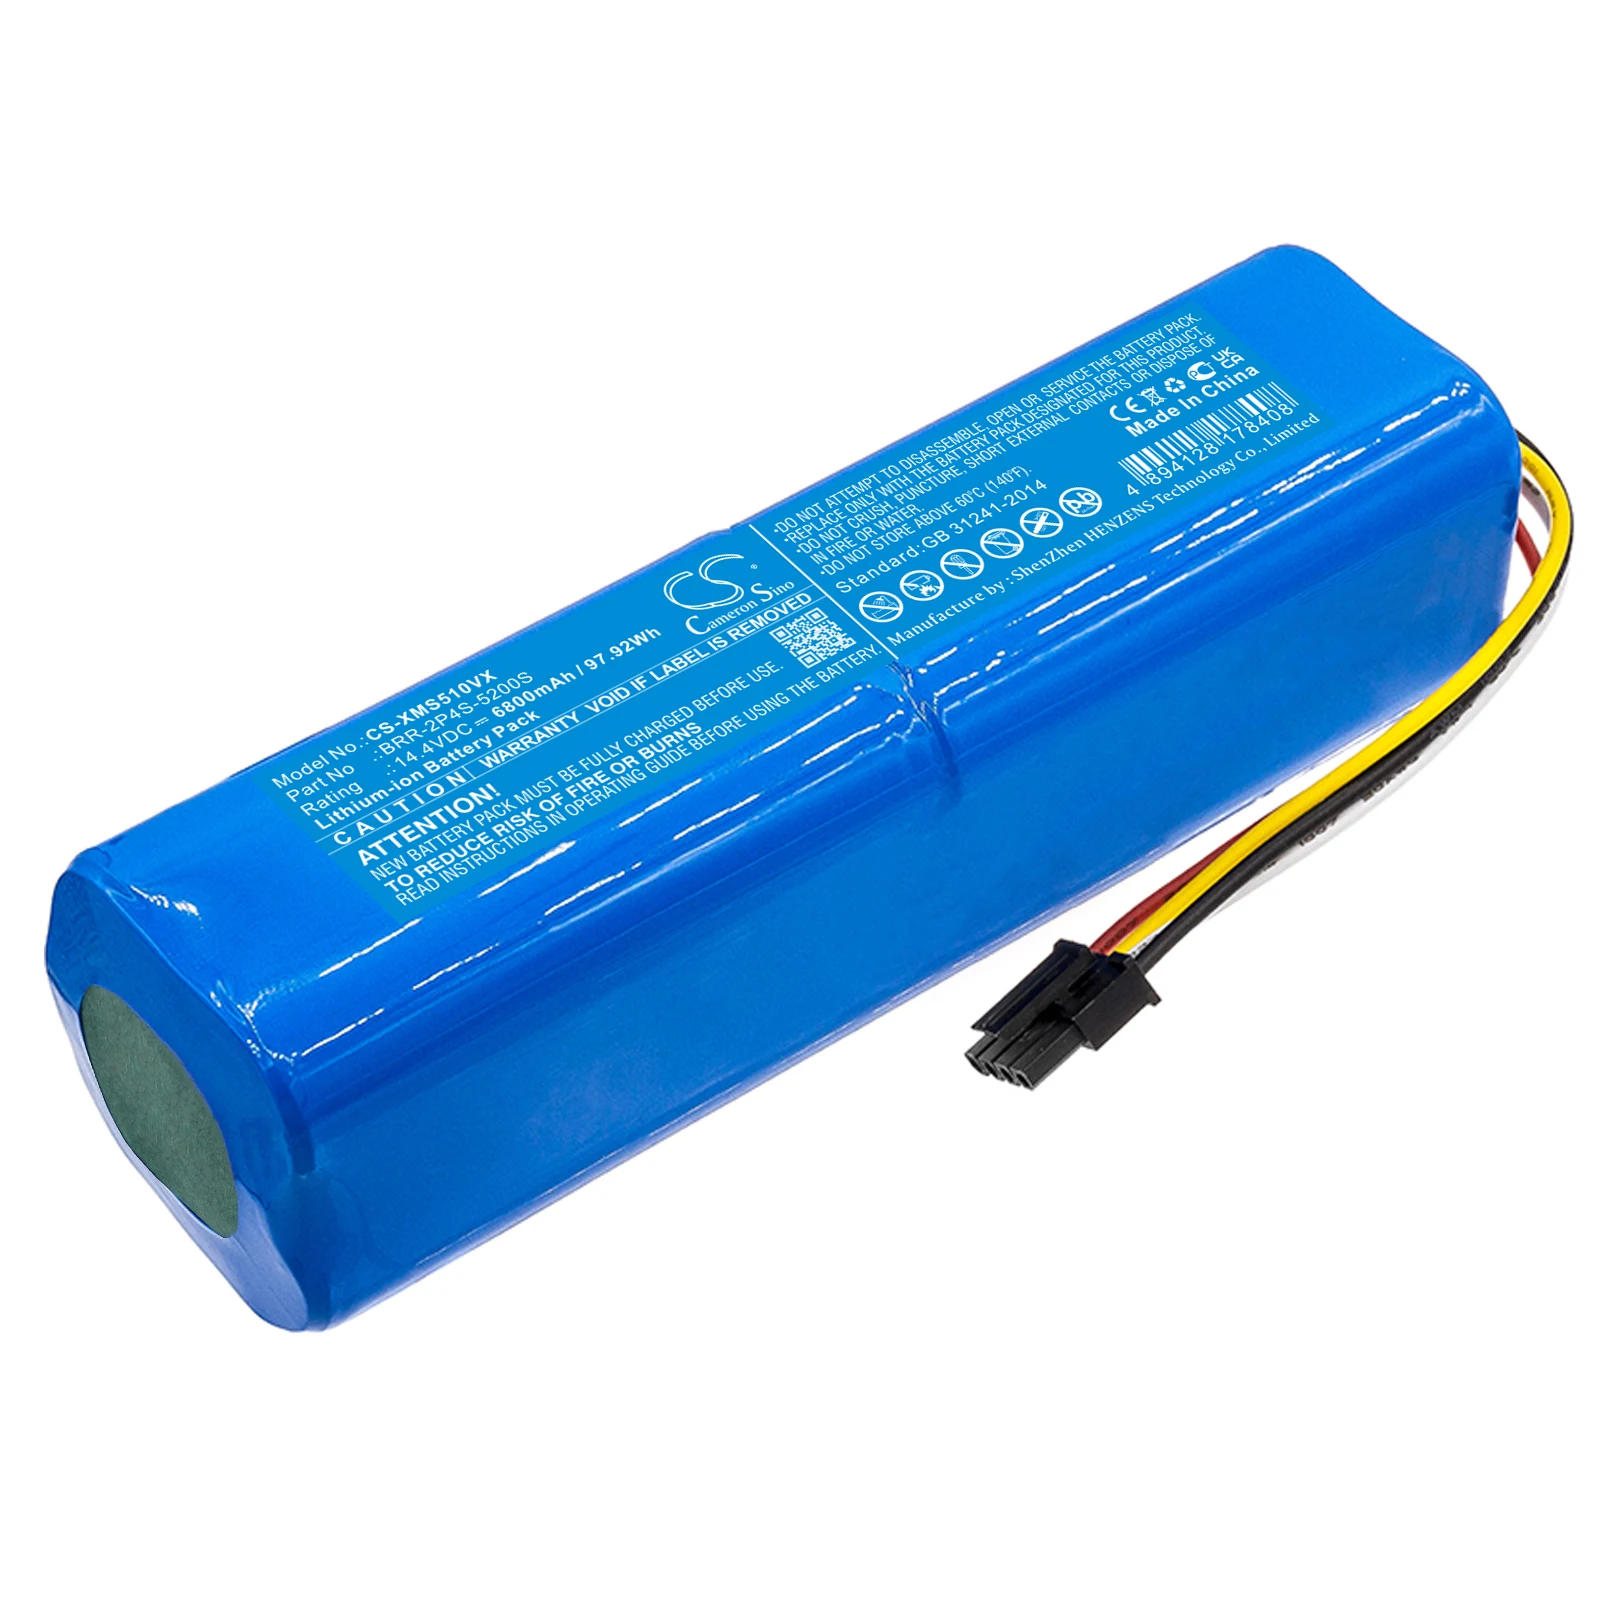 

Vacuum Battery For Roborock S552-00 S552 S5 Max S6 Pure S75 S70 S7 S55 S51 T65 T61 T60 S65 S60 S50 S6 Sweep One S51 Mi Robo